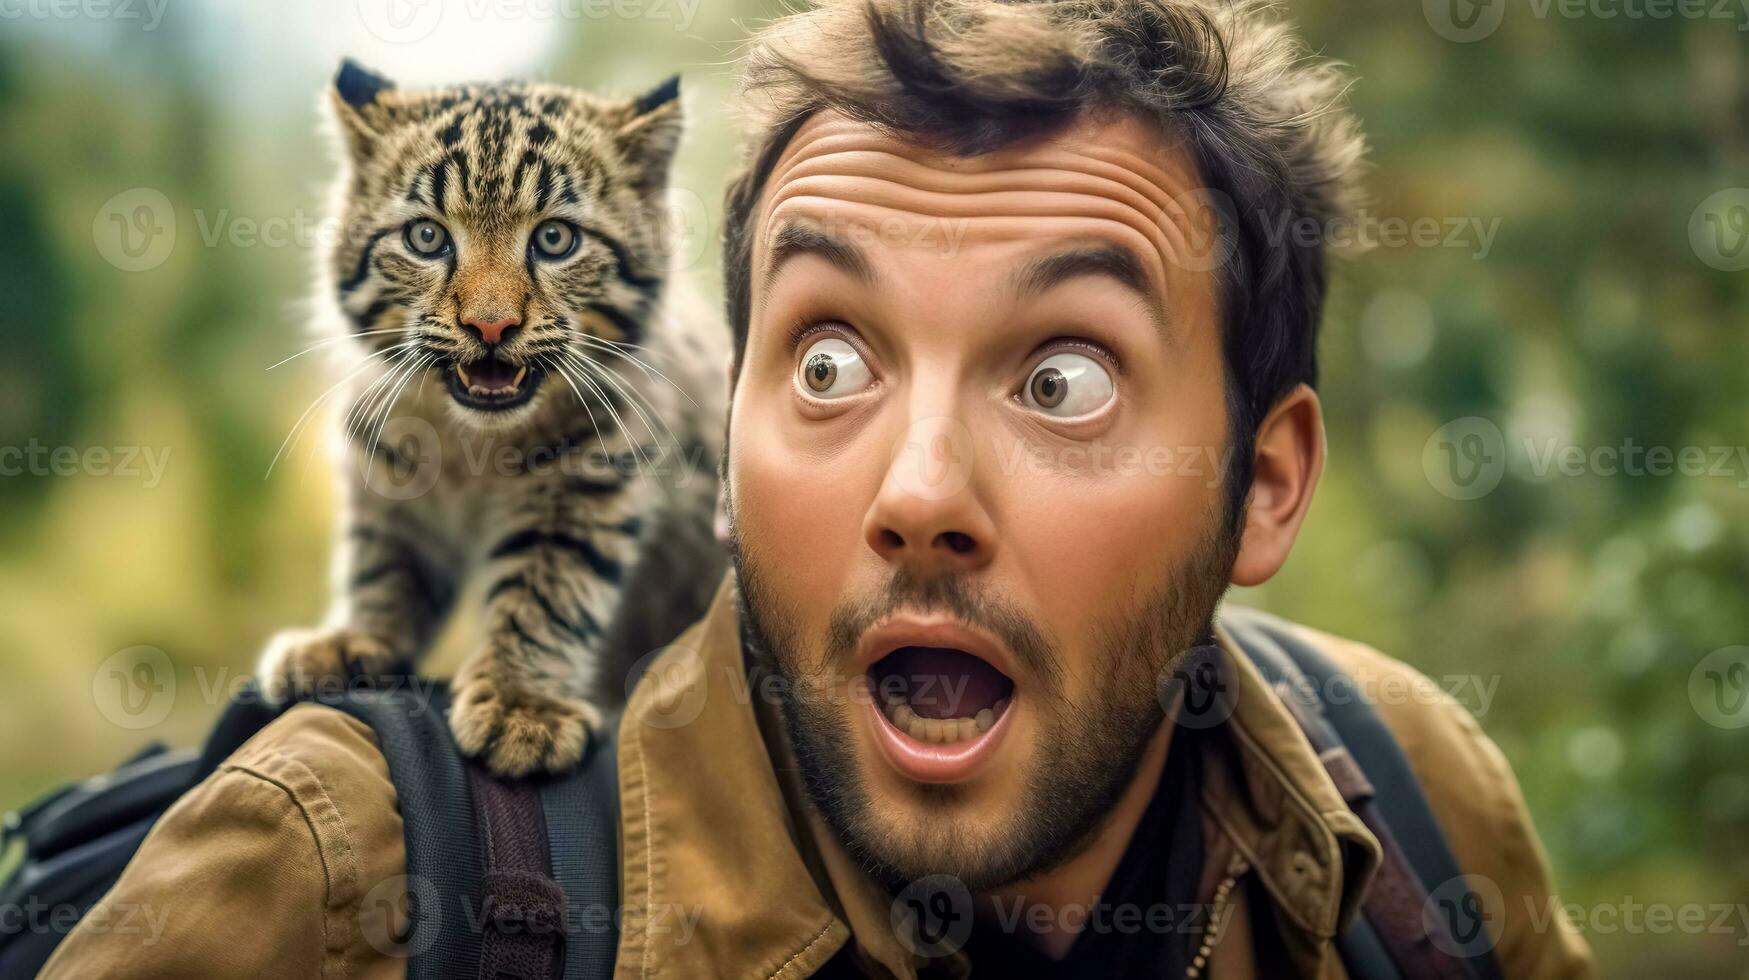 AI Generated man with a surprised expression as a baby clouded leopard perches on his shoulder, both looking startled in a forest setting photo